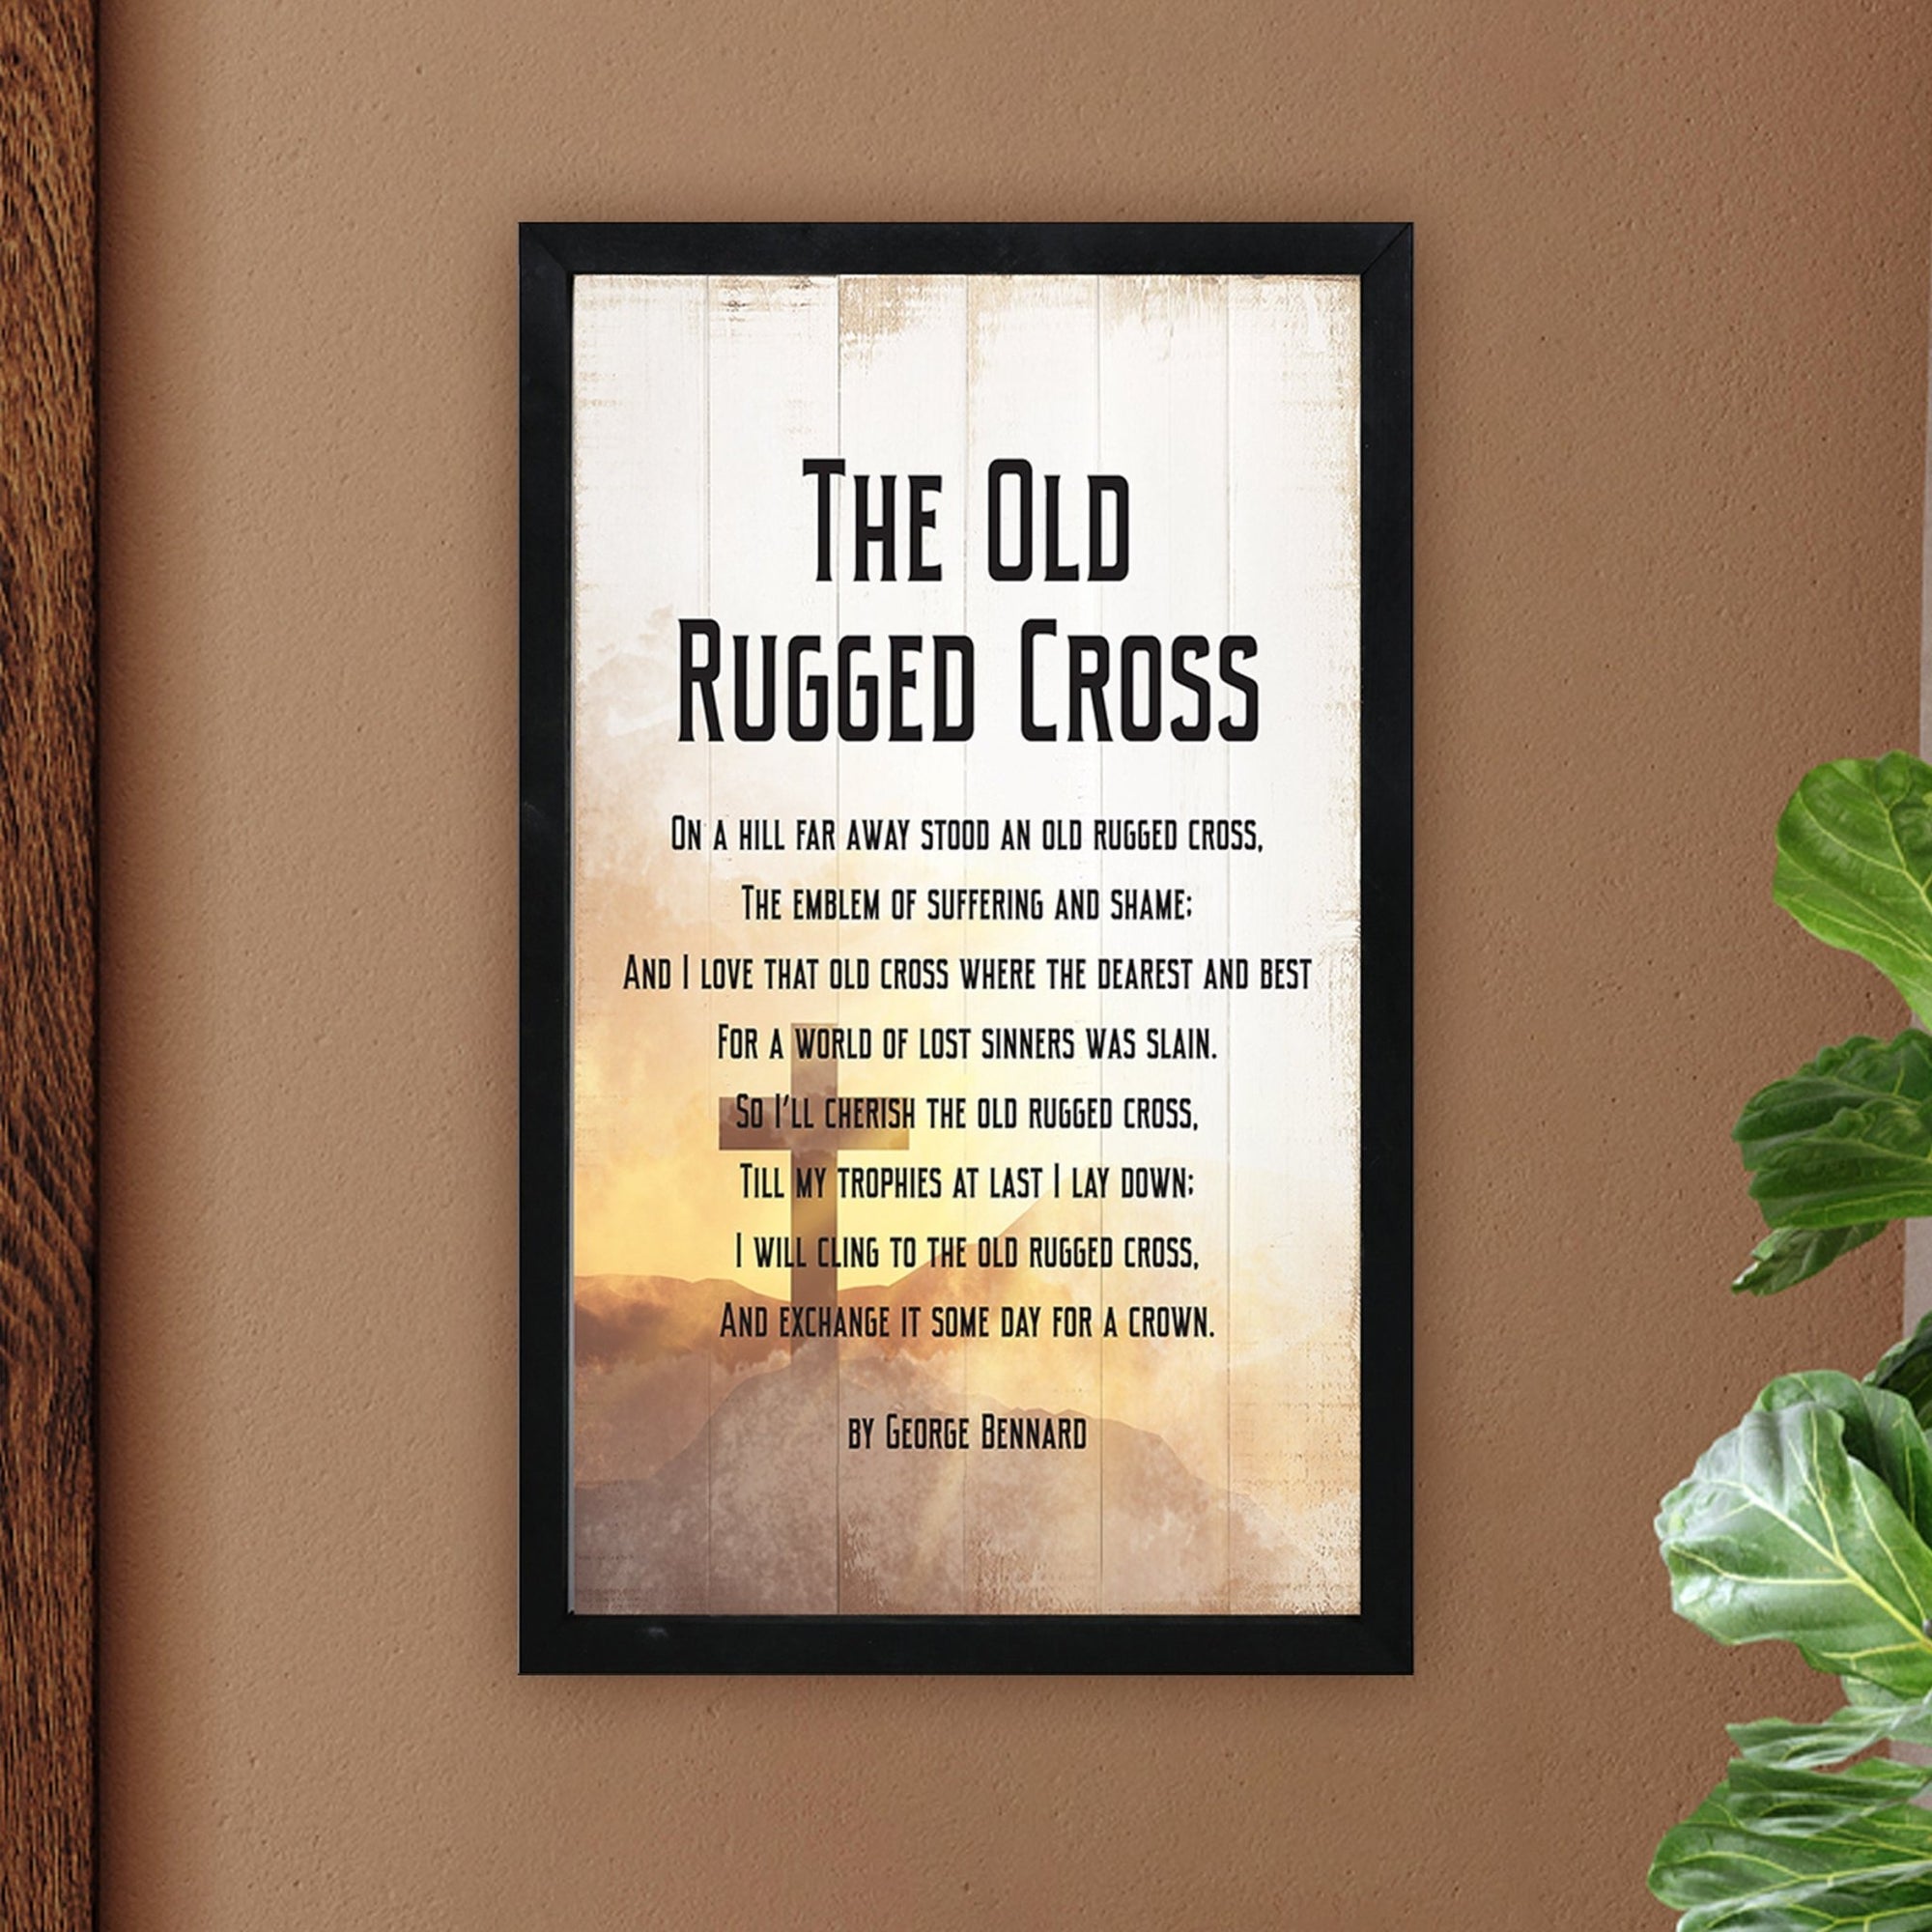 Modern-Inspired Framed Shadow Box For Home & Gift Ideas - The Old Rugged Cross - LifeSong Milestones